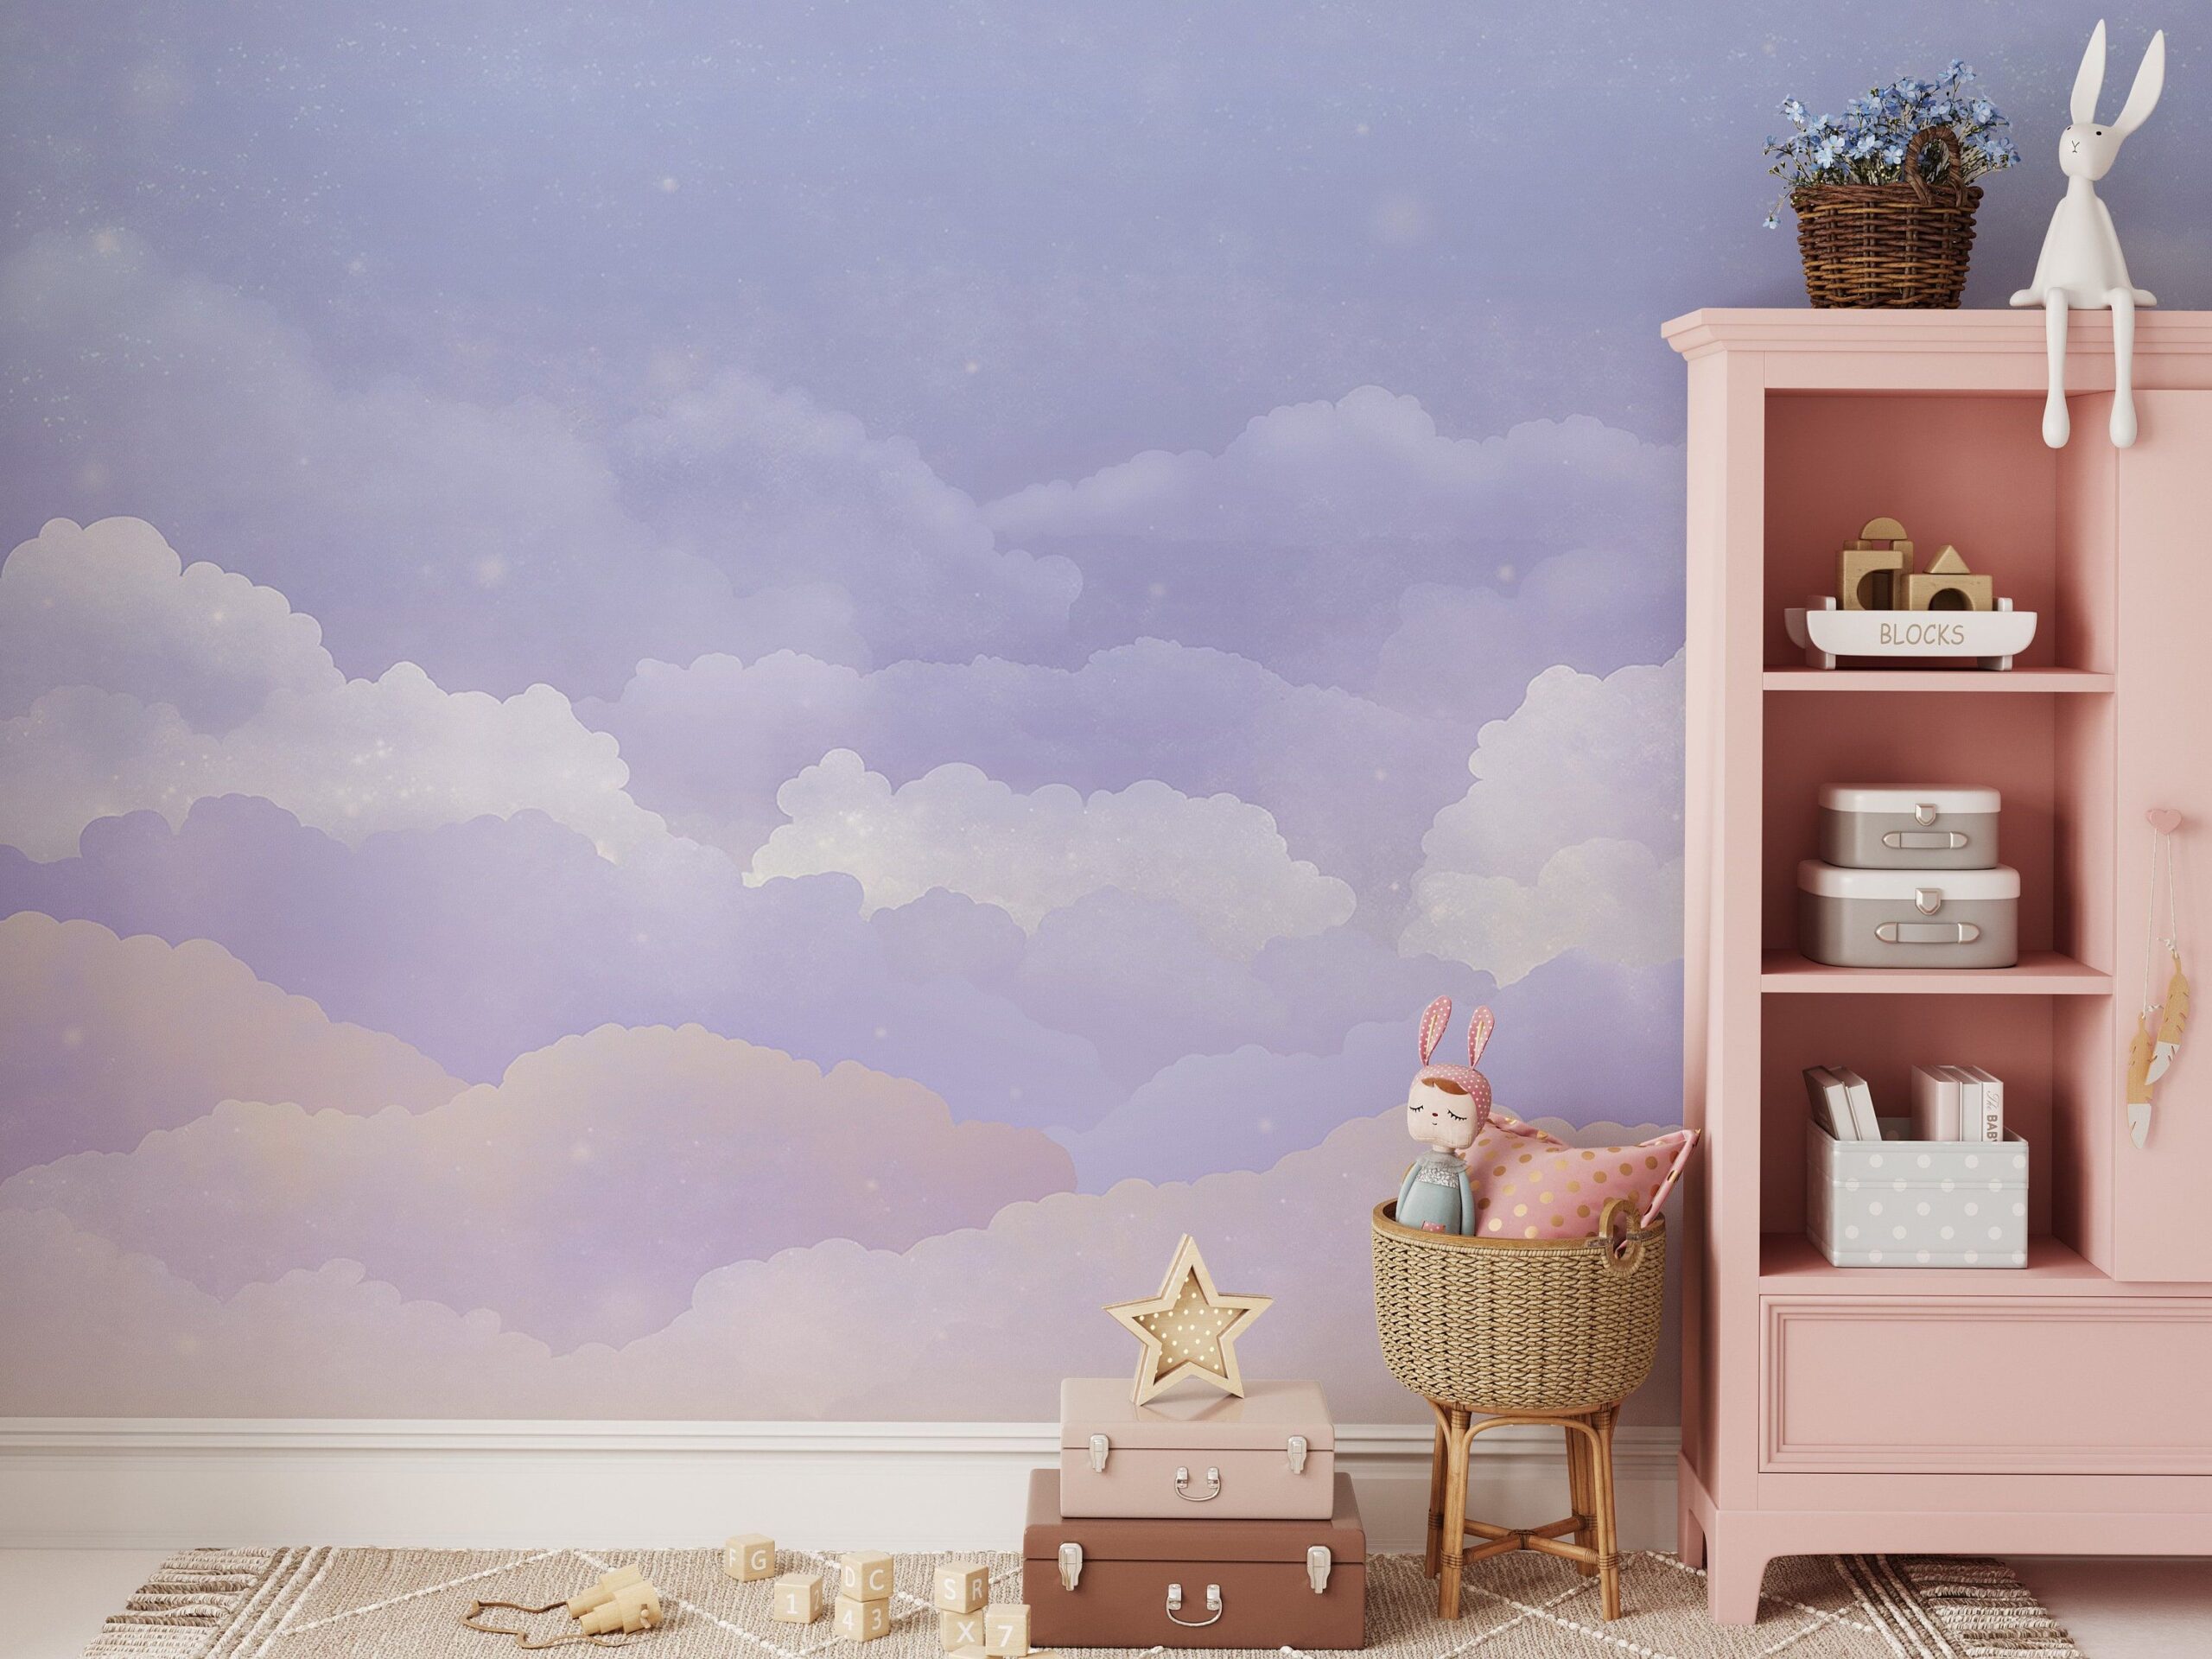 Kids Room Design In Calm Shades Creating a Tranquil Atmosphere in Children’s Bedrooms with Soft Color Palettes